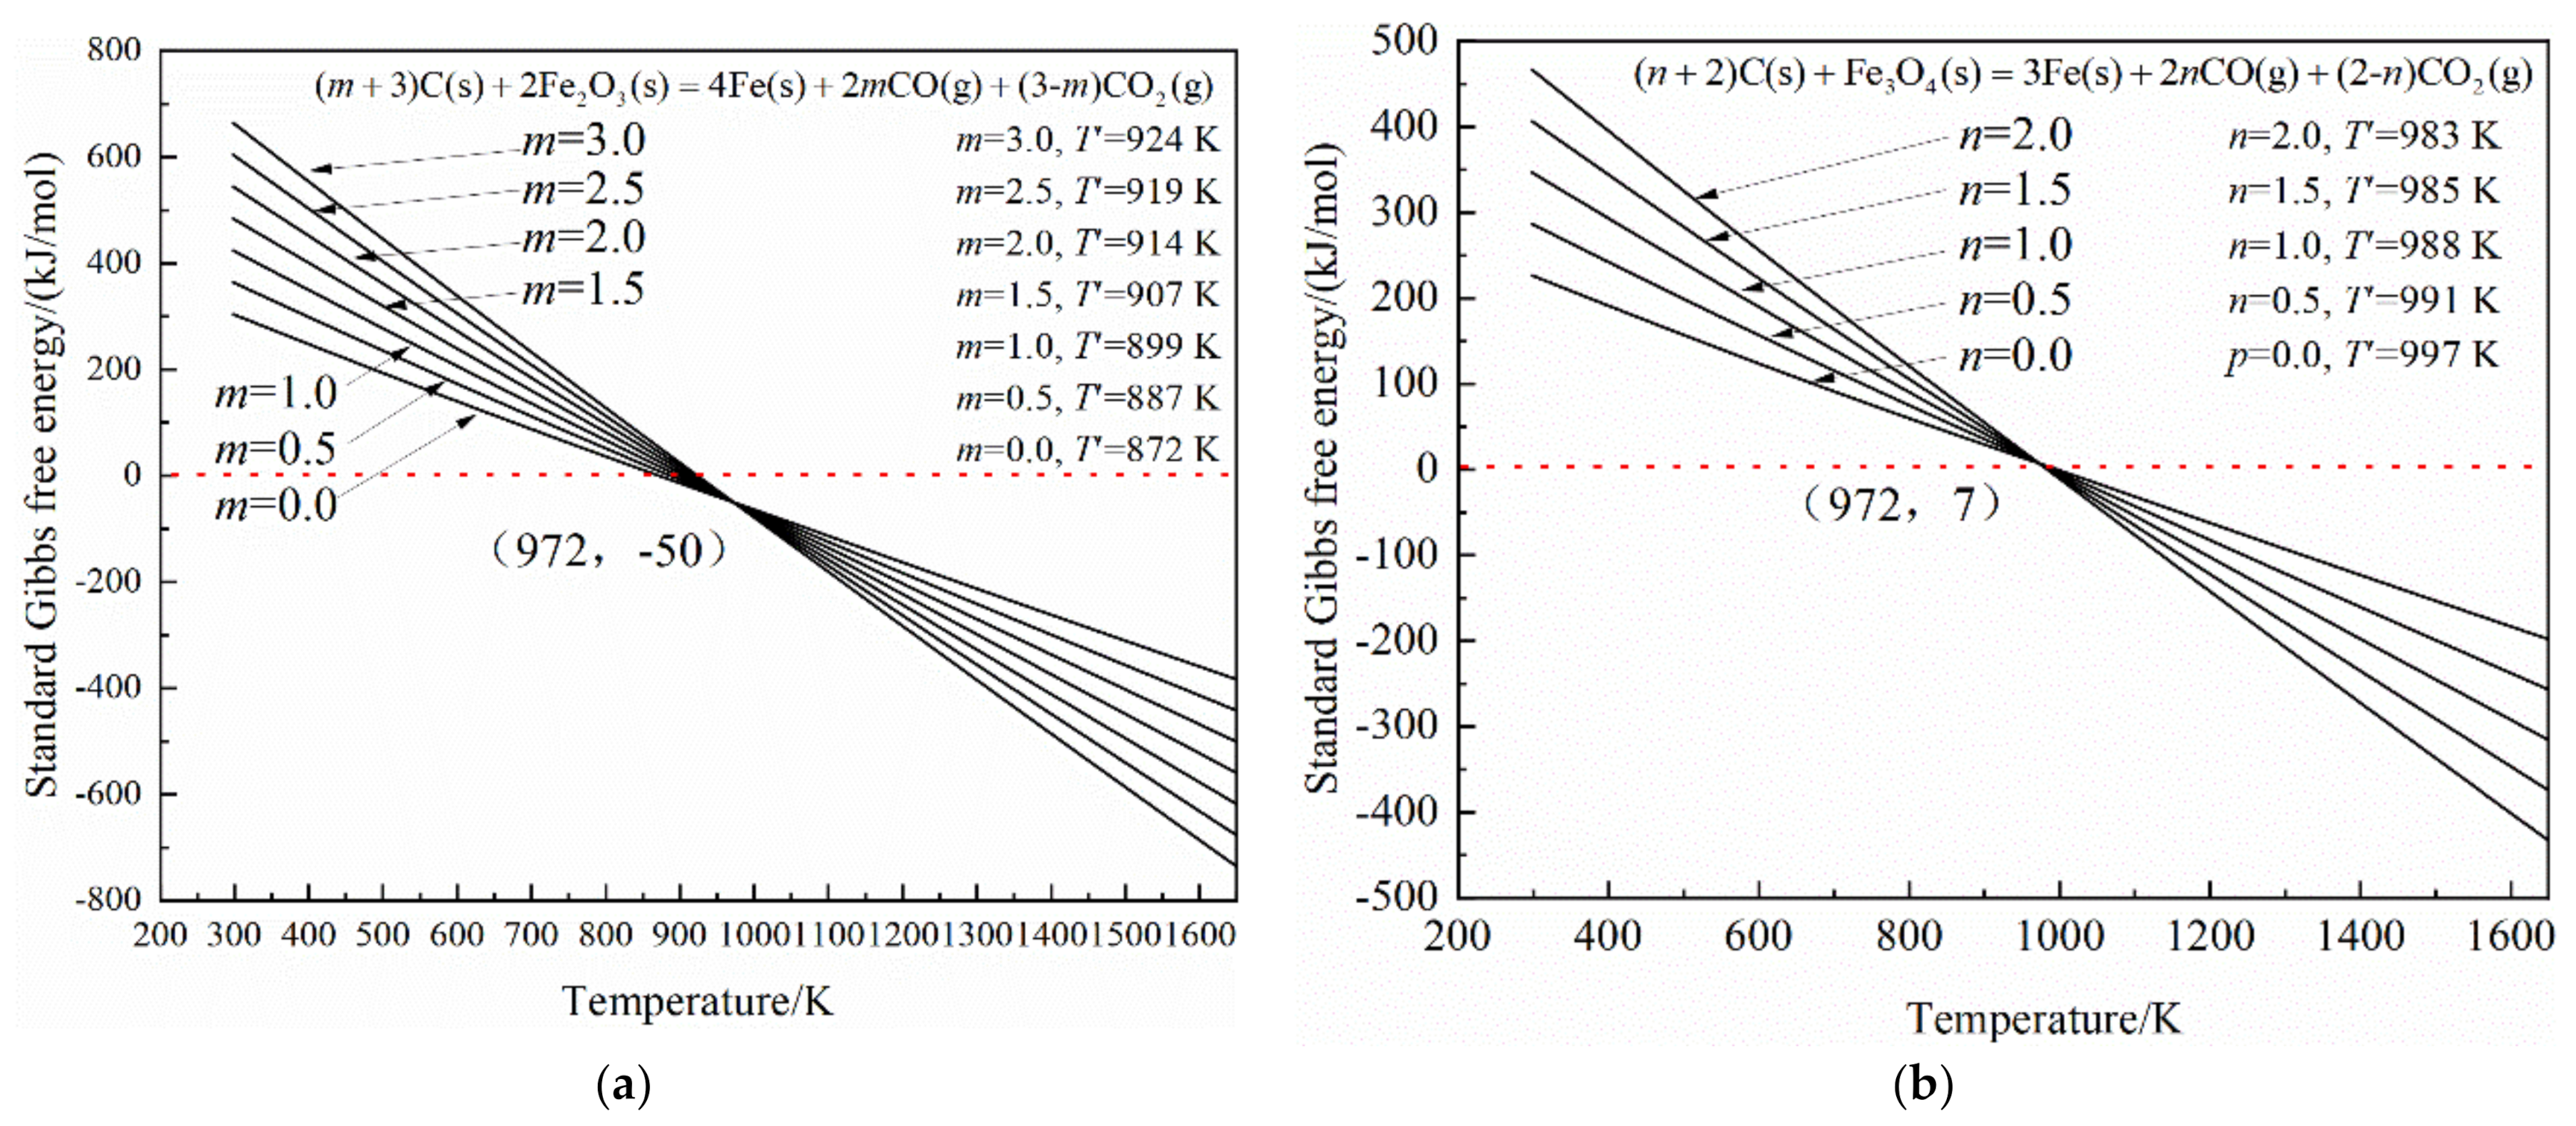 Energies Free Full Text Thermodynamic Study Of Energy Consumption And Carbon Dioxide Emission In Ironmaking Process Of The Reduction Of Iron Oxides By Carbon Html